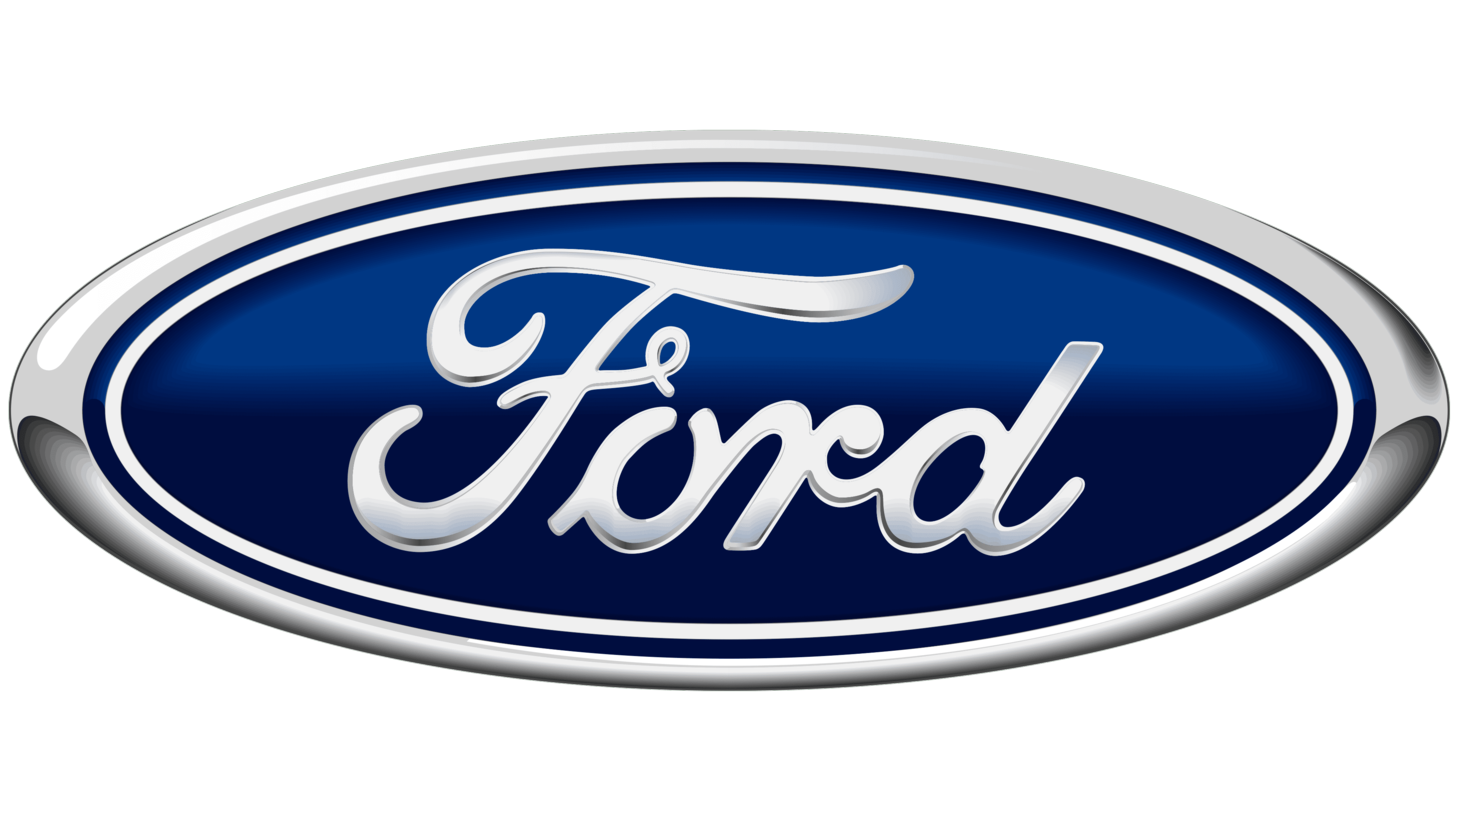 Ford sign 1976 2003